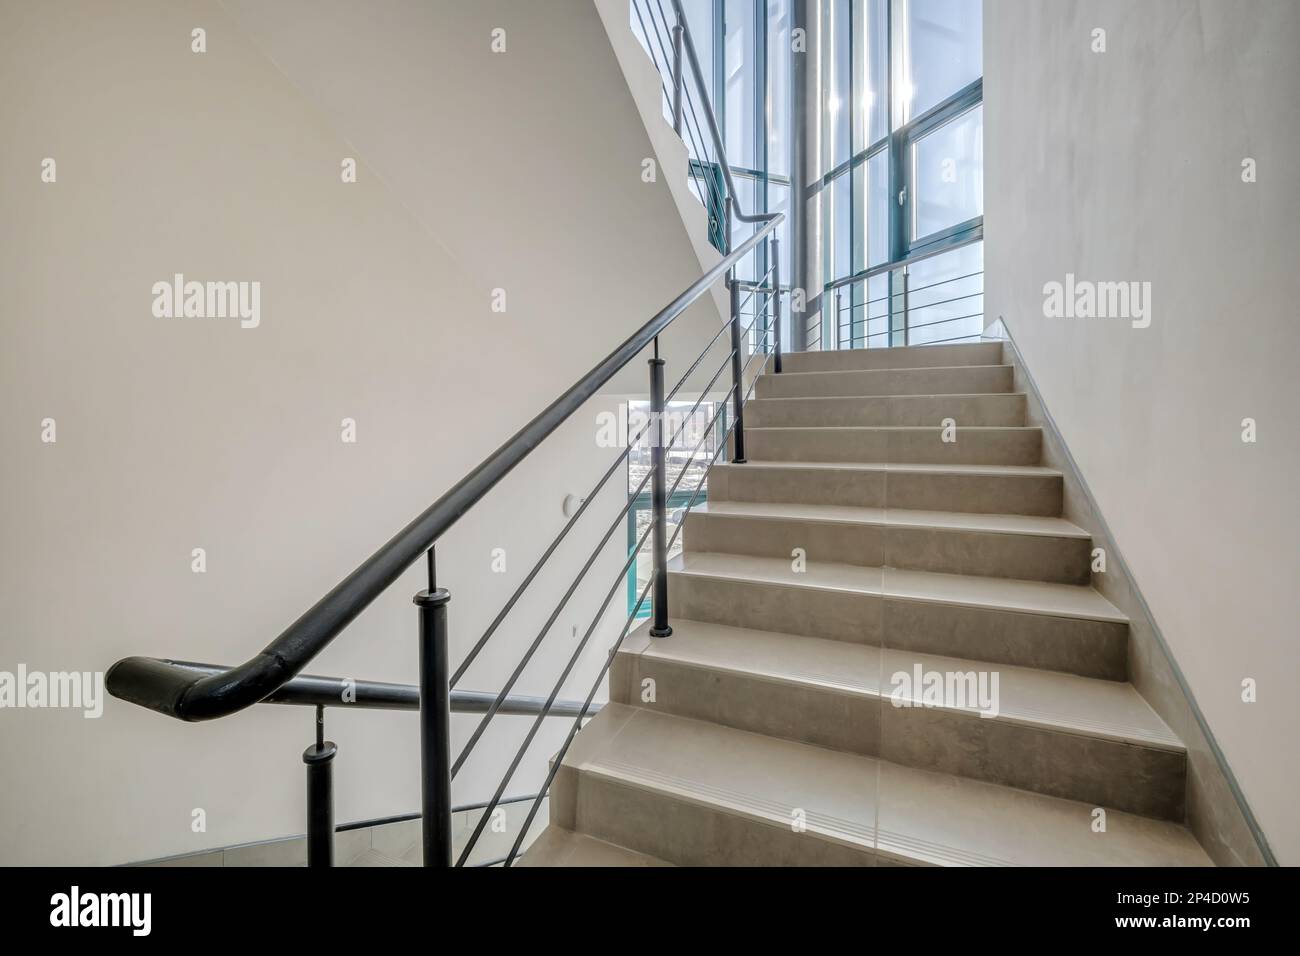 stairs  emergency and evacuation exit stair in up ladder in a new office building Stock Photo